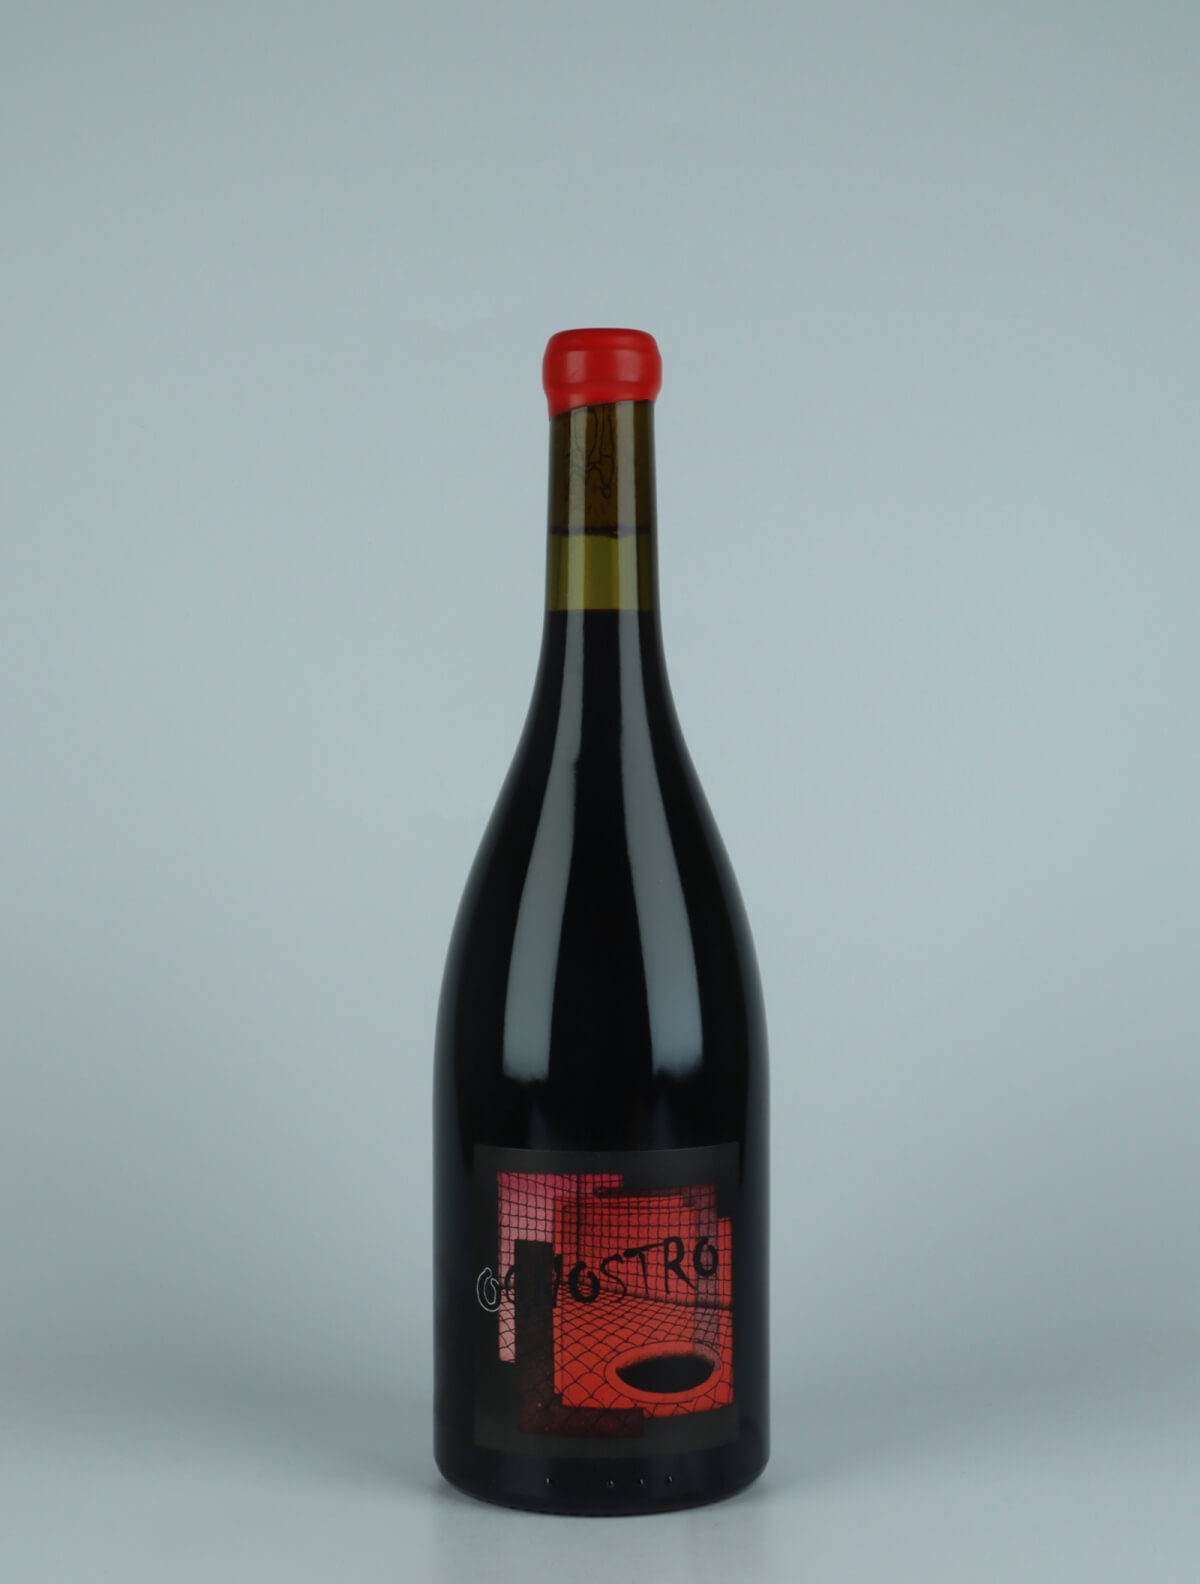 A bottle 2020 Ognostro Rosso Red wine from Marco Tinessa, Campania in Italy